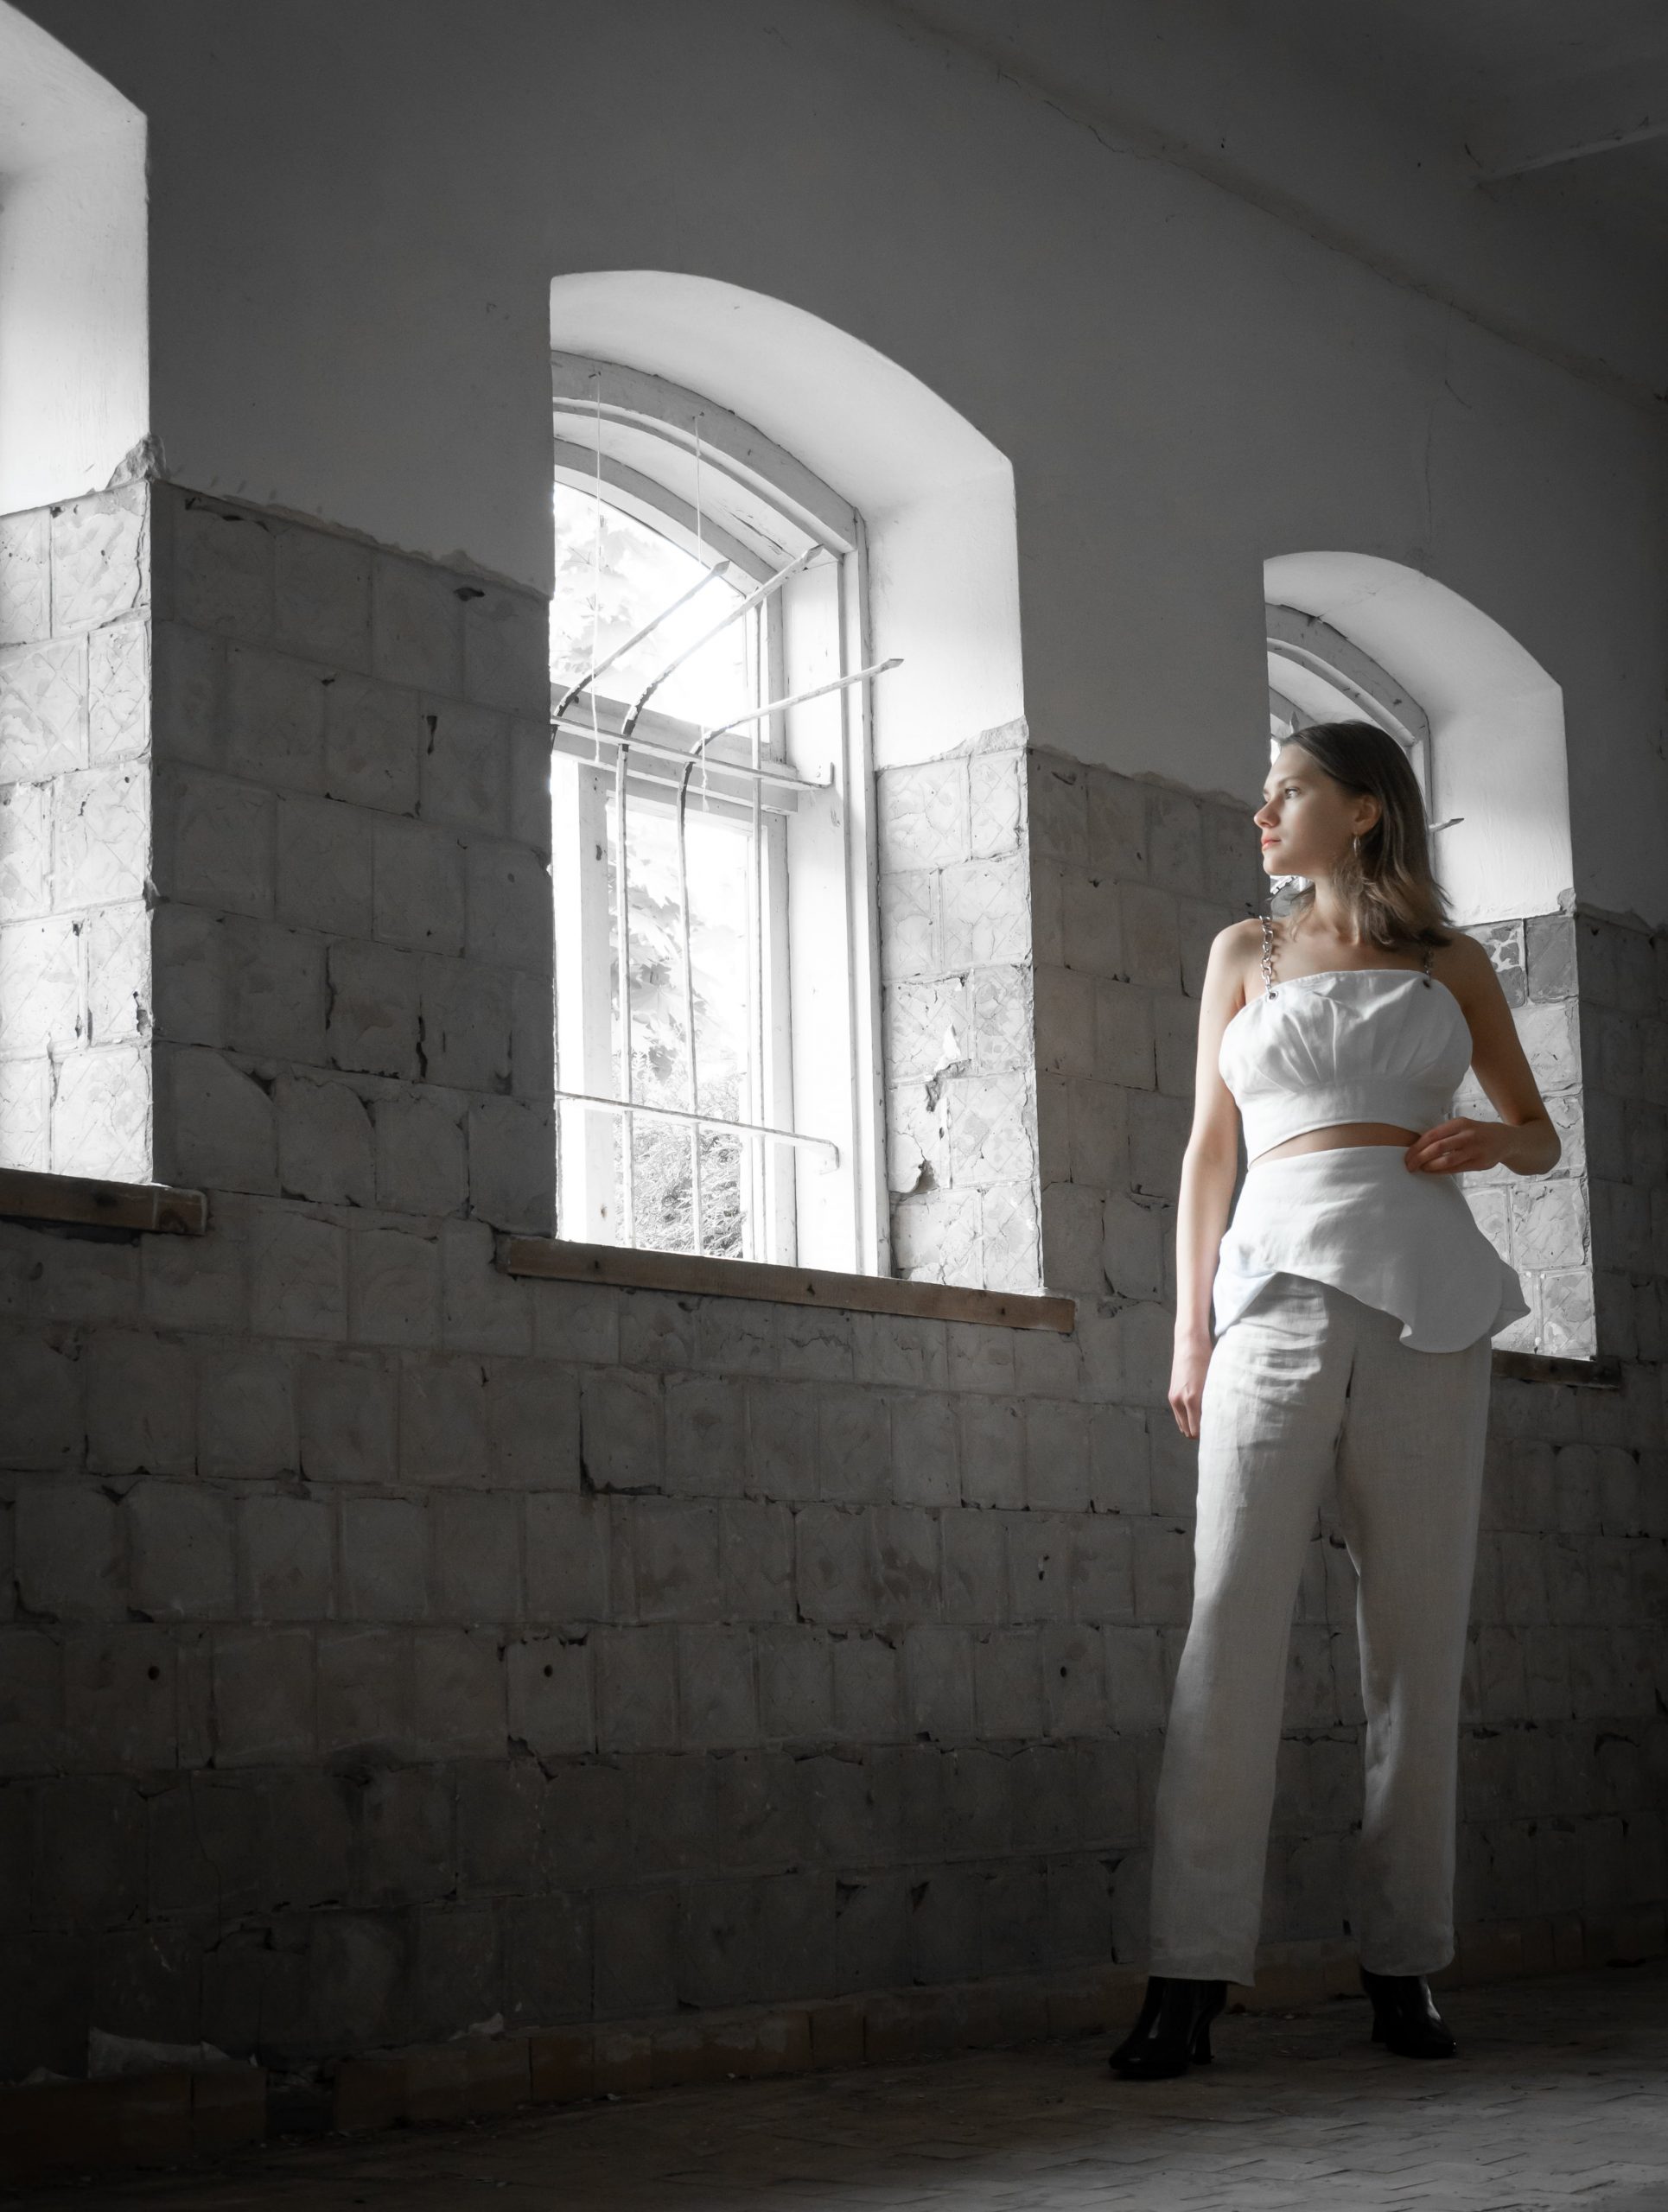 Blond girl in white top, white skirt and white pants - standing next to a concrete wall.